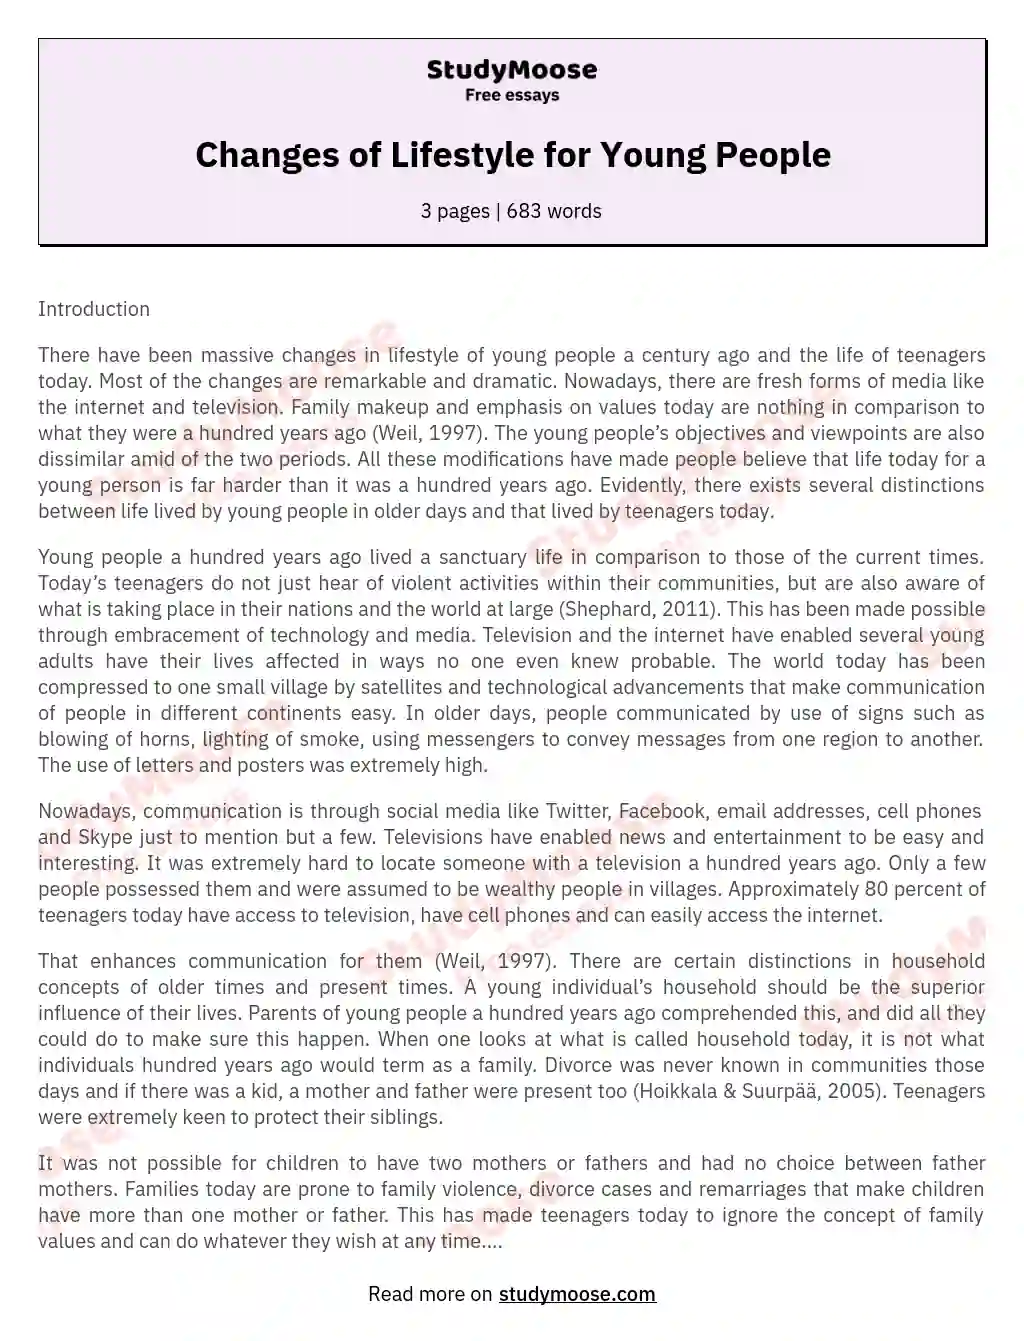 Changes of Lifestyle for Young People essay